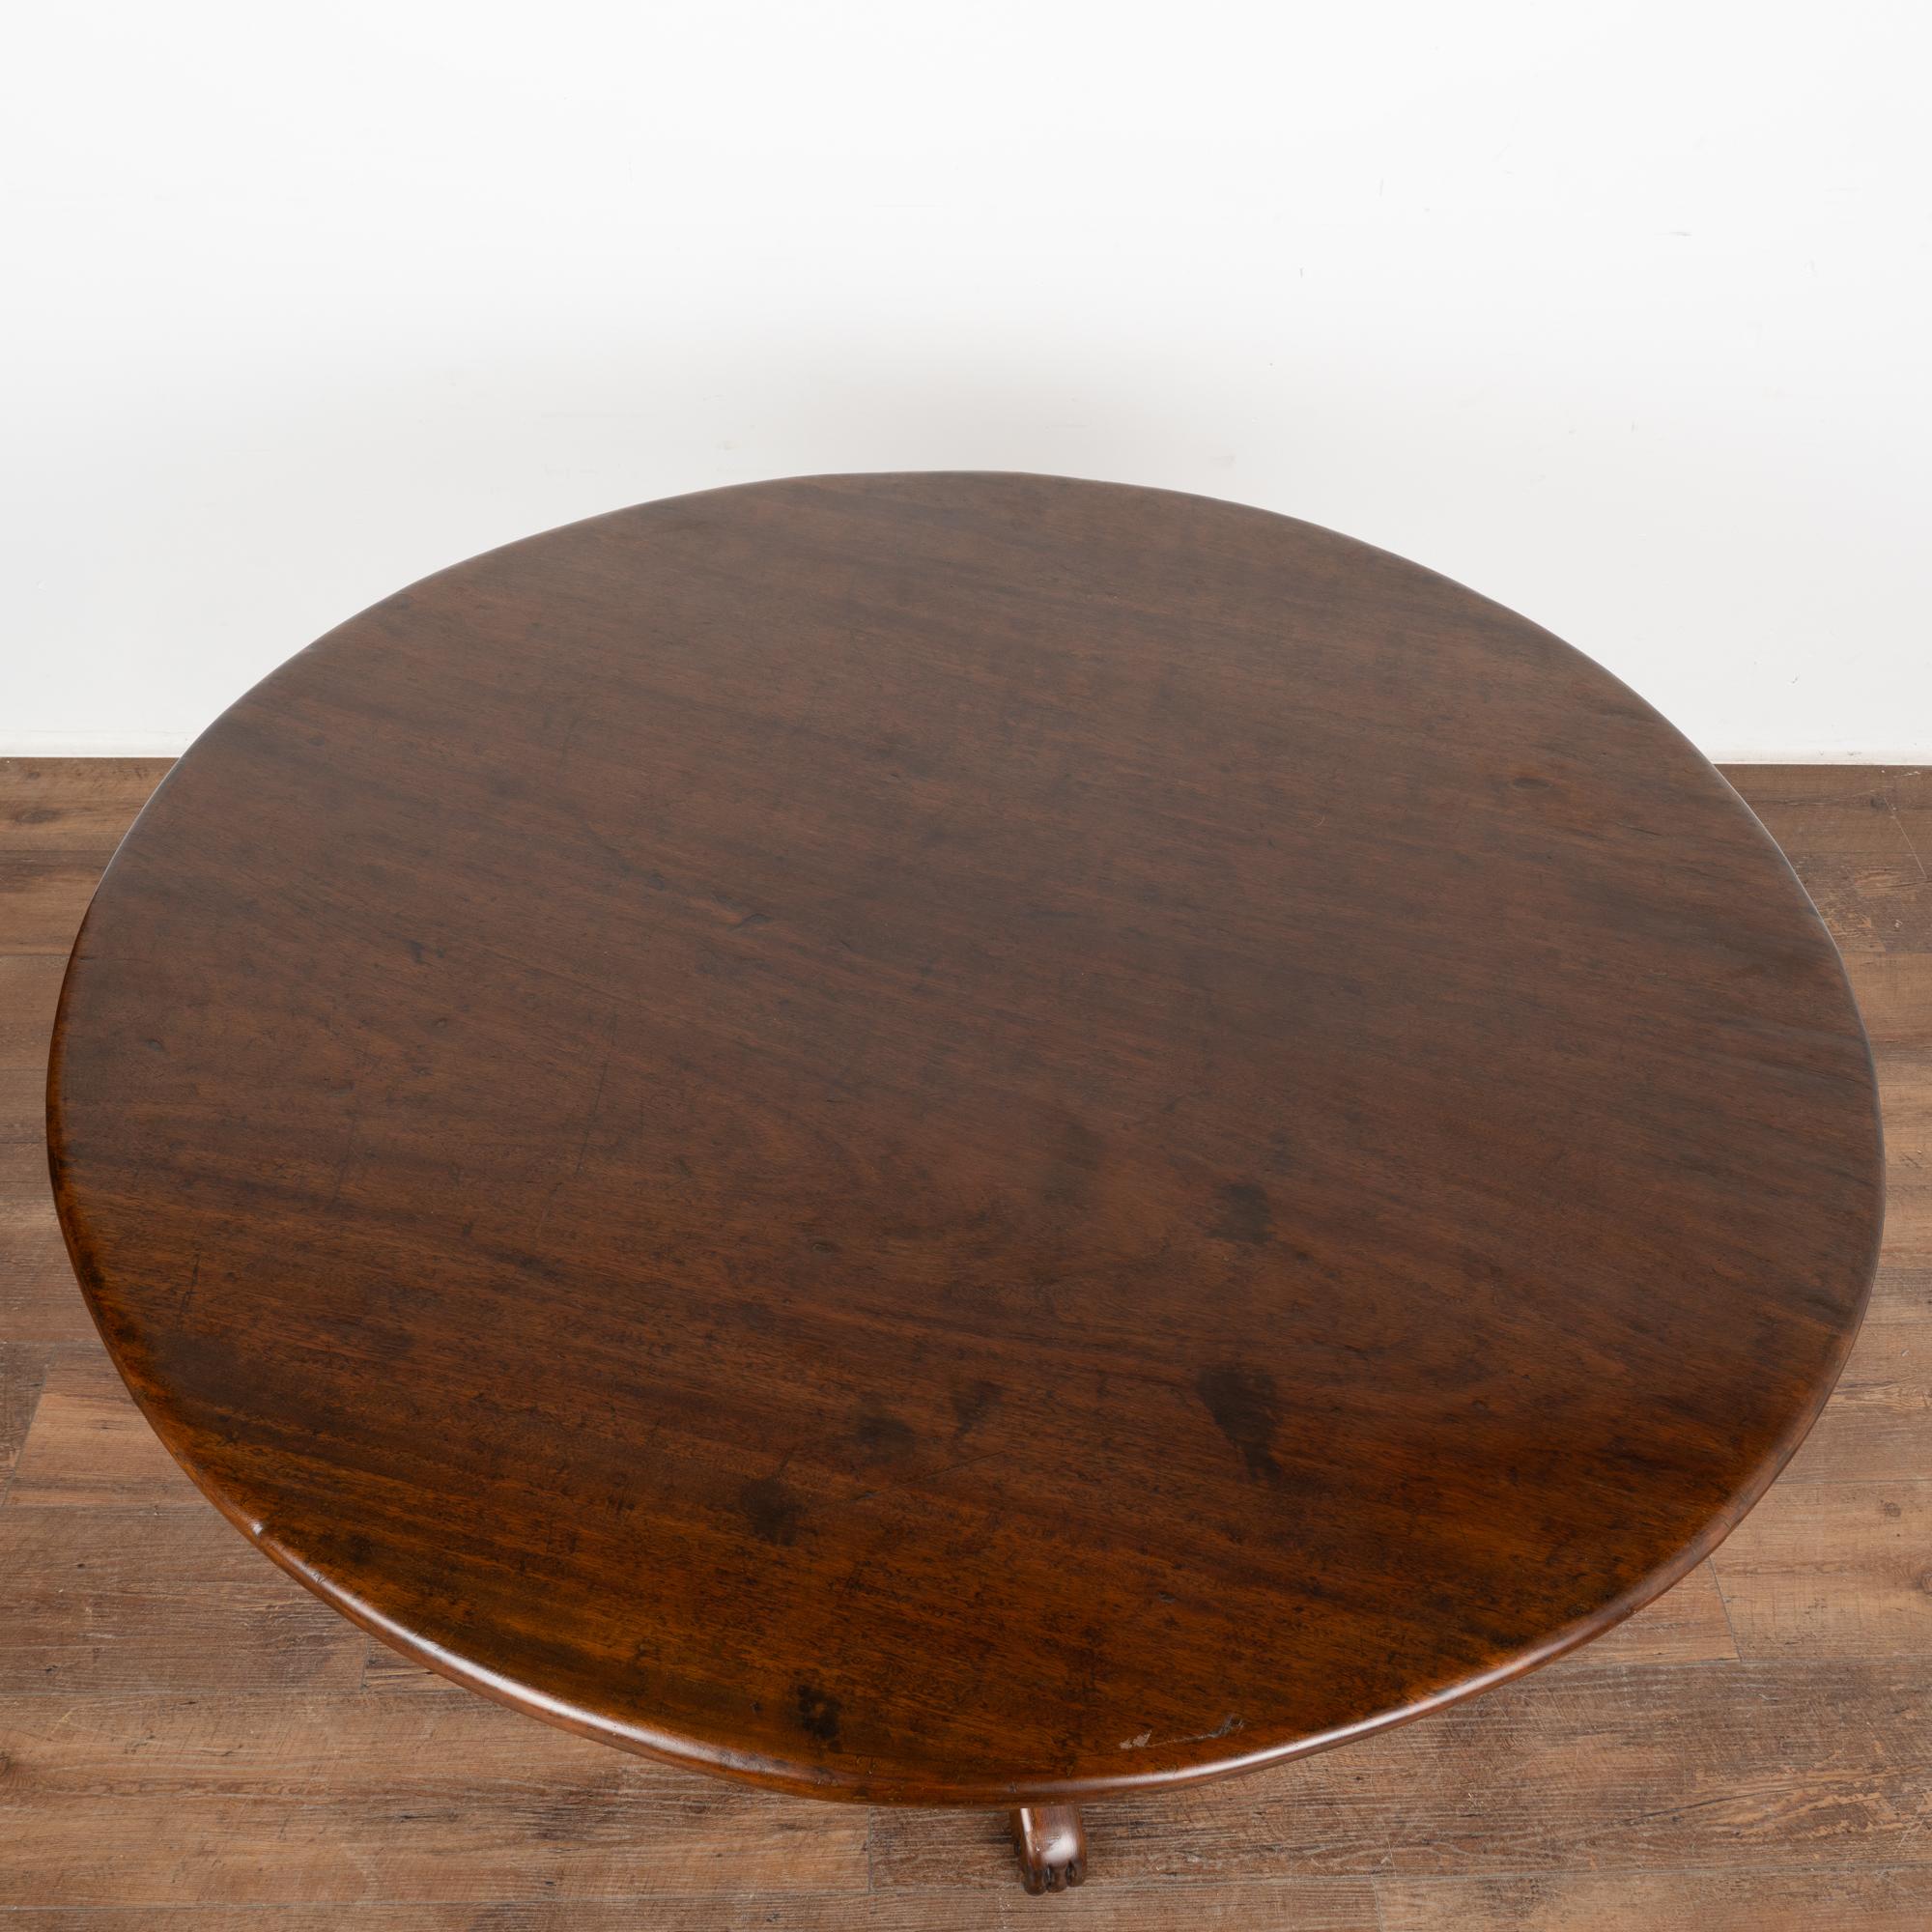 Round Narra Wood Pedestal Table, Philippines circa 1840-60 In Good Condition For Sale In Round Top, TX